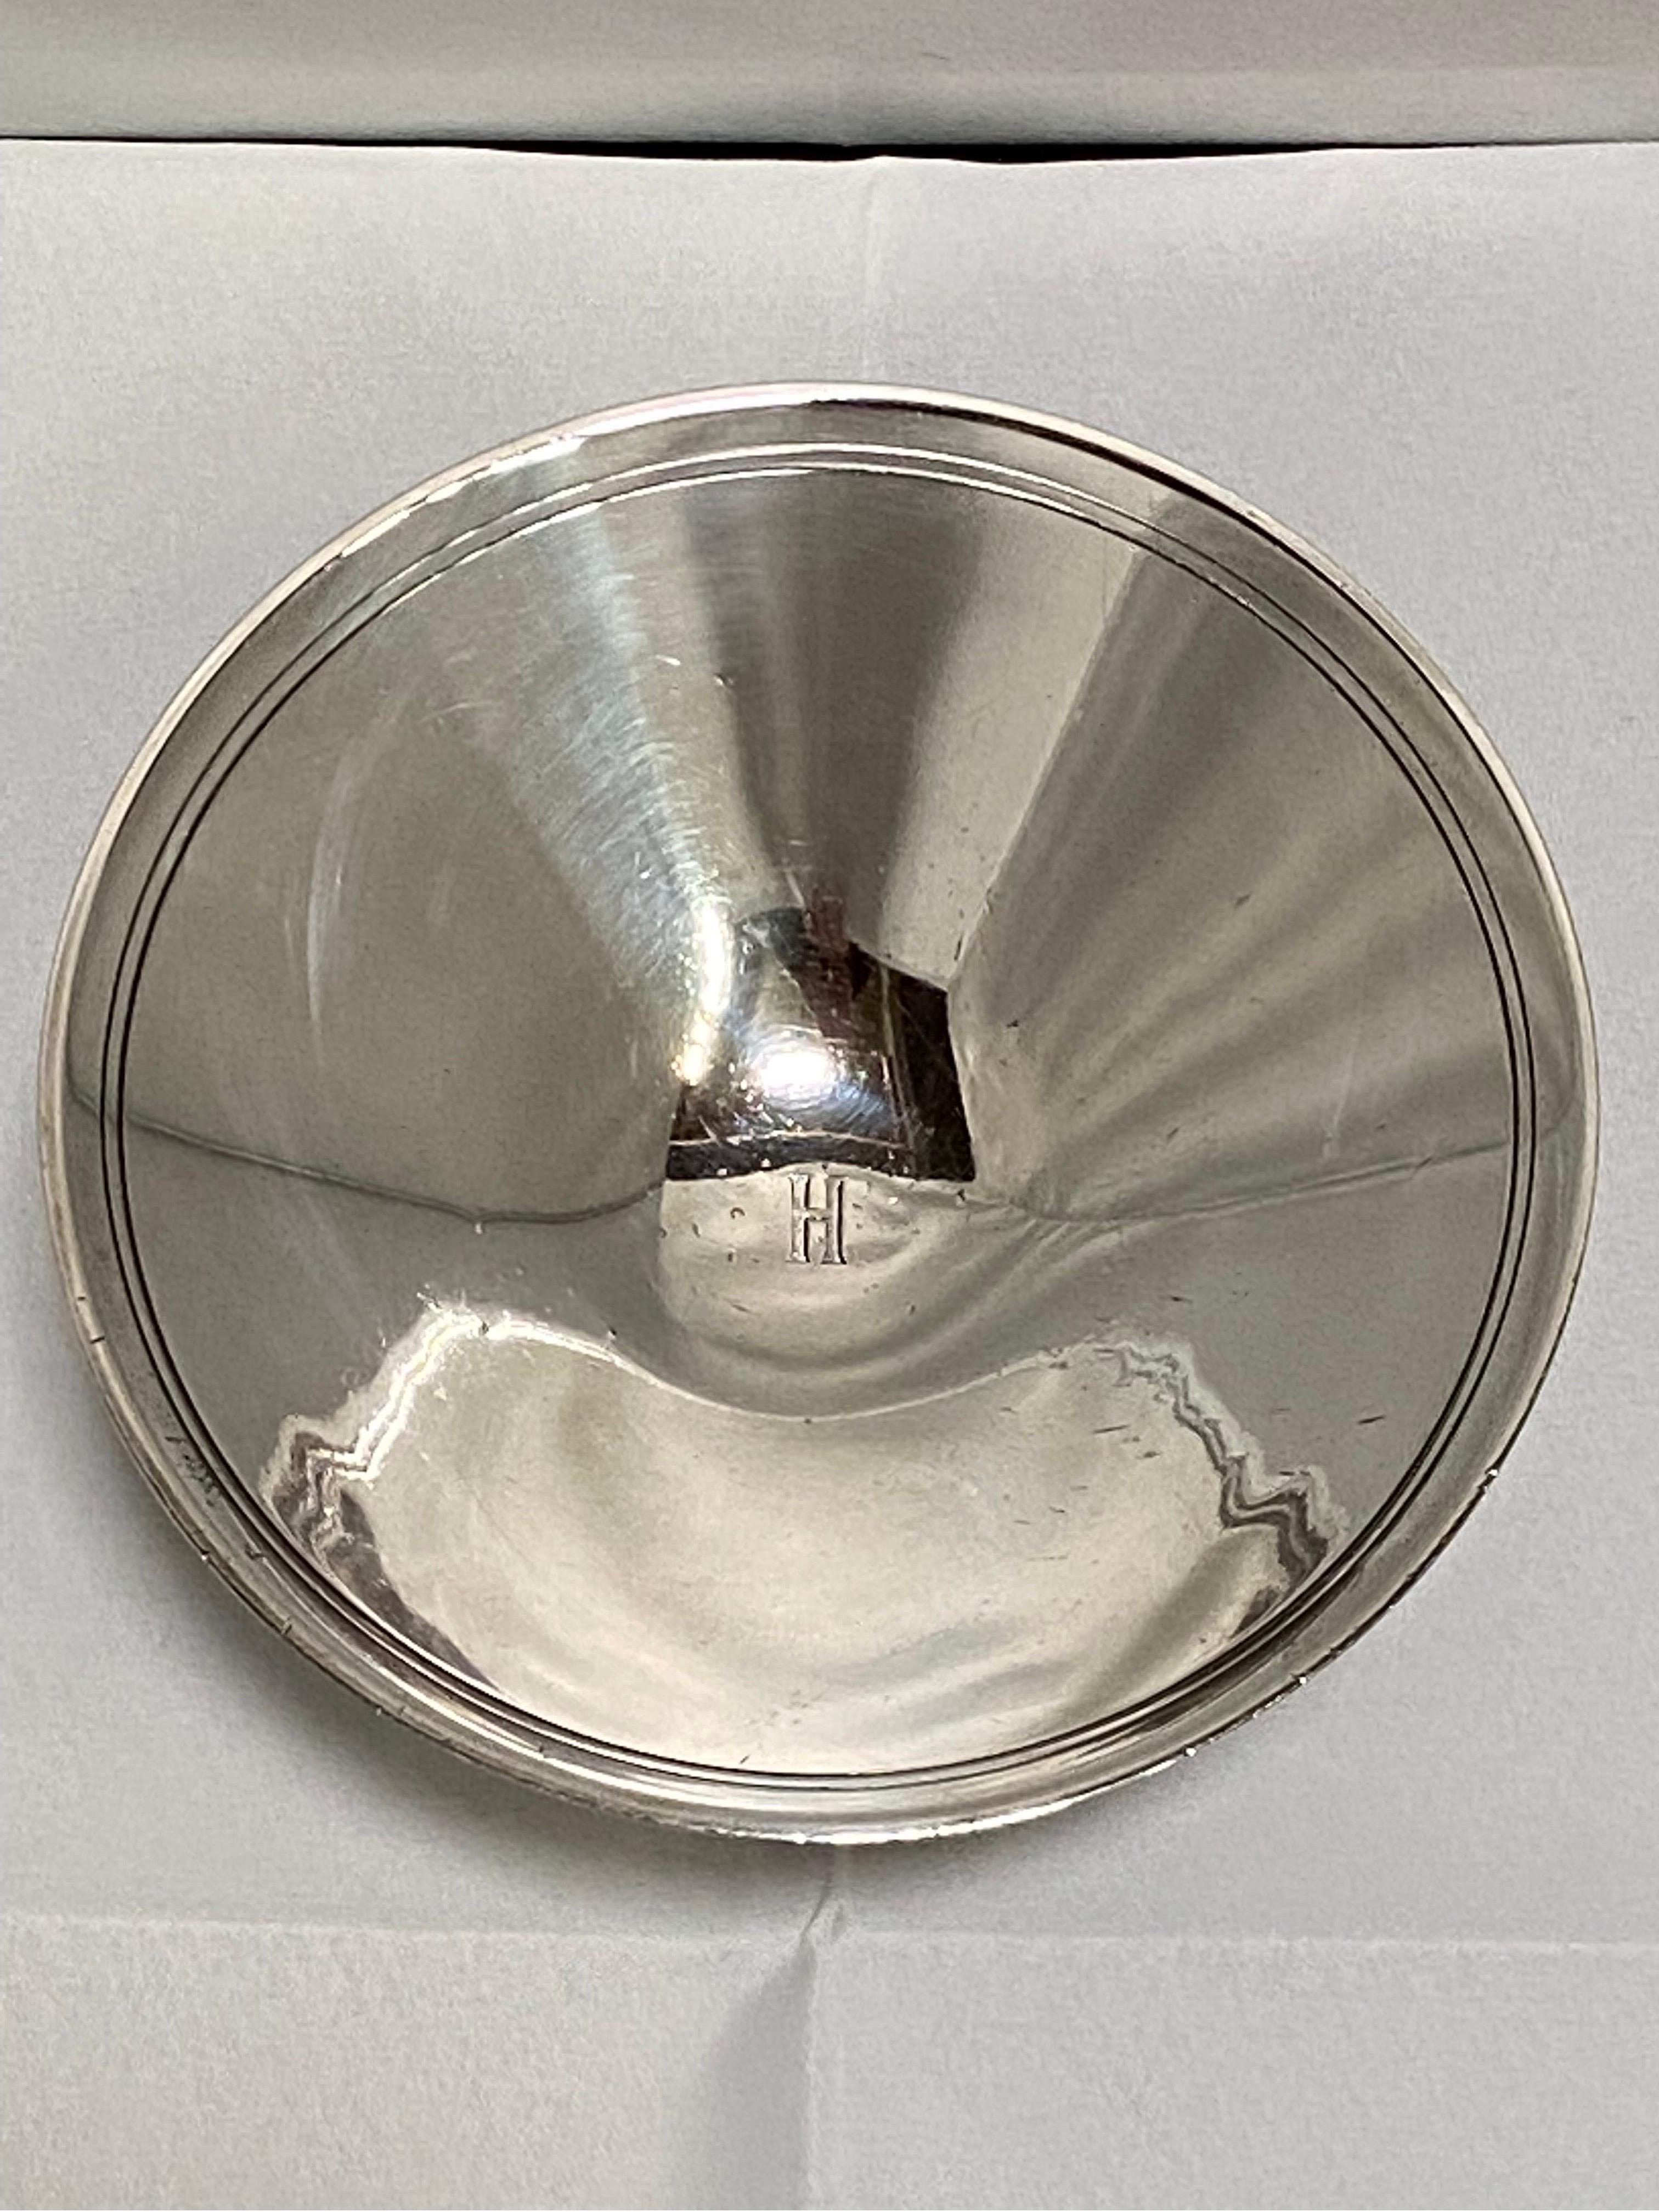 A vintage mid 20th Century, circa 1940’s, sterling silver footed bowl or compote dish made by Tiffany & Co. This piece exhibits the quality and design that Tiffany is known for throughout its history since the founding of the company in 1837. On the